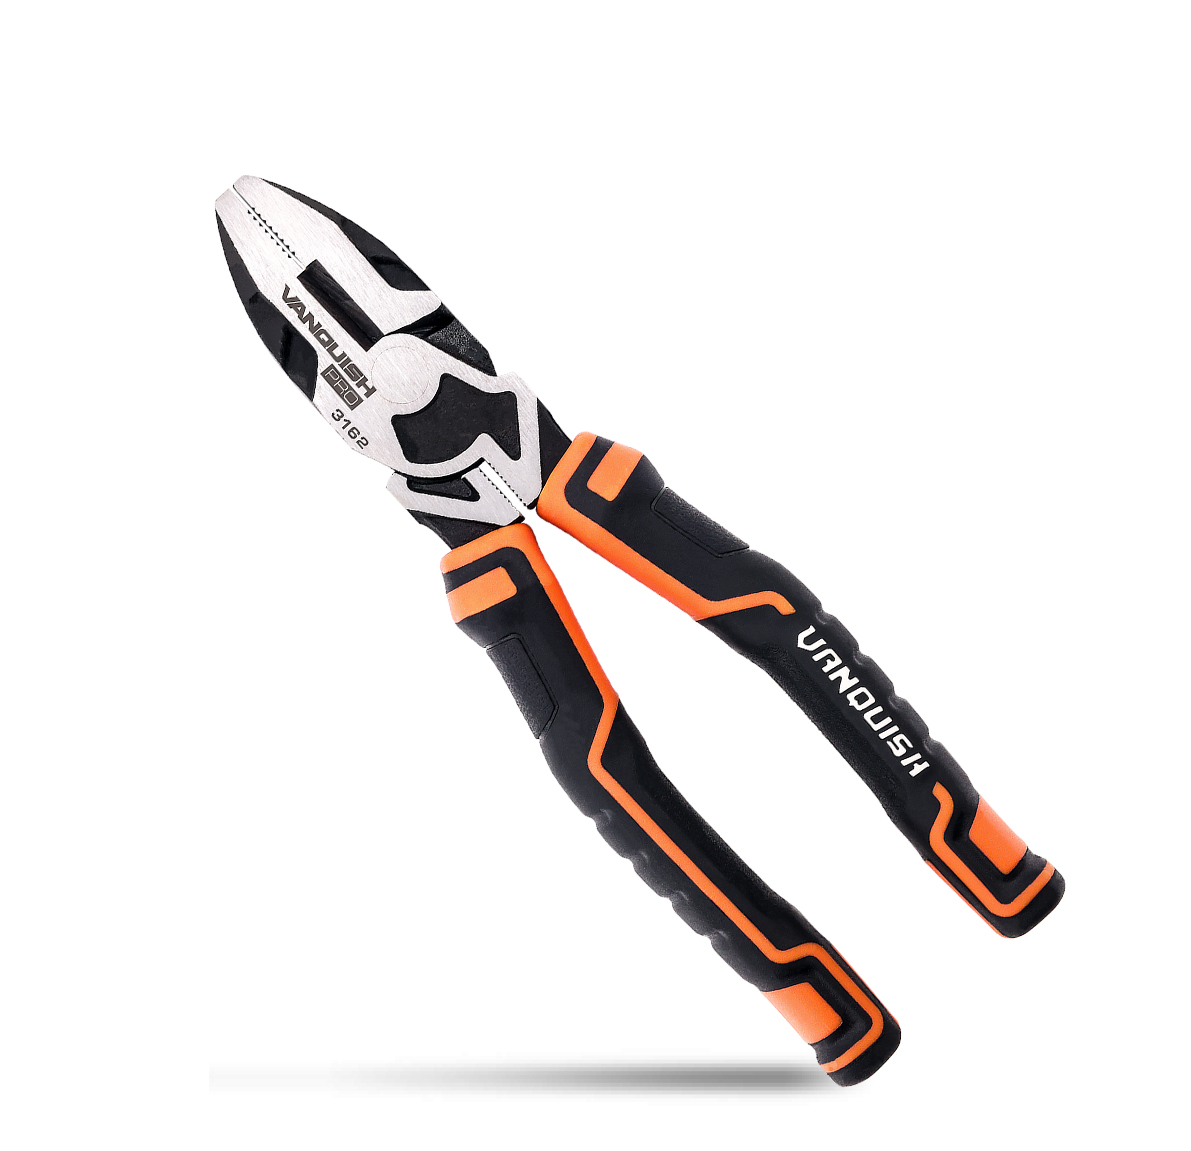 HIGH-LEVERAGE LINESMAN PLIERS